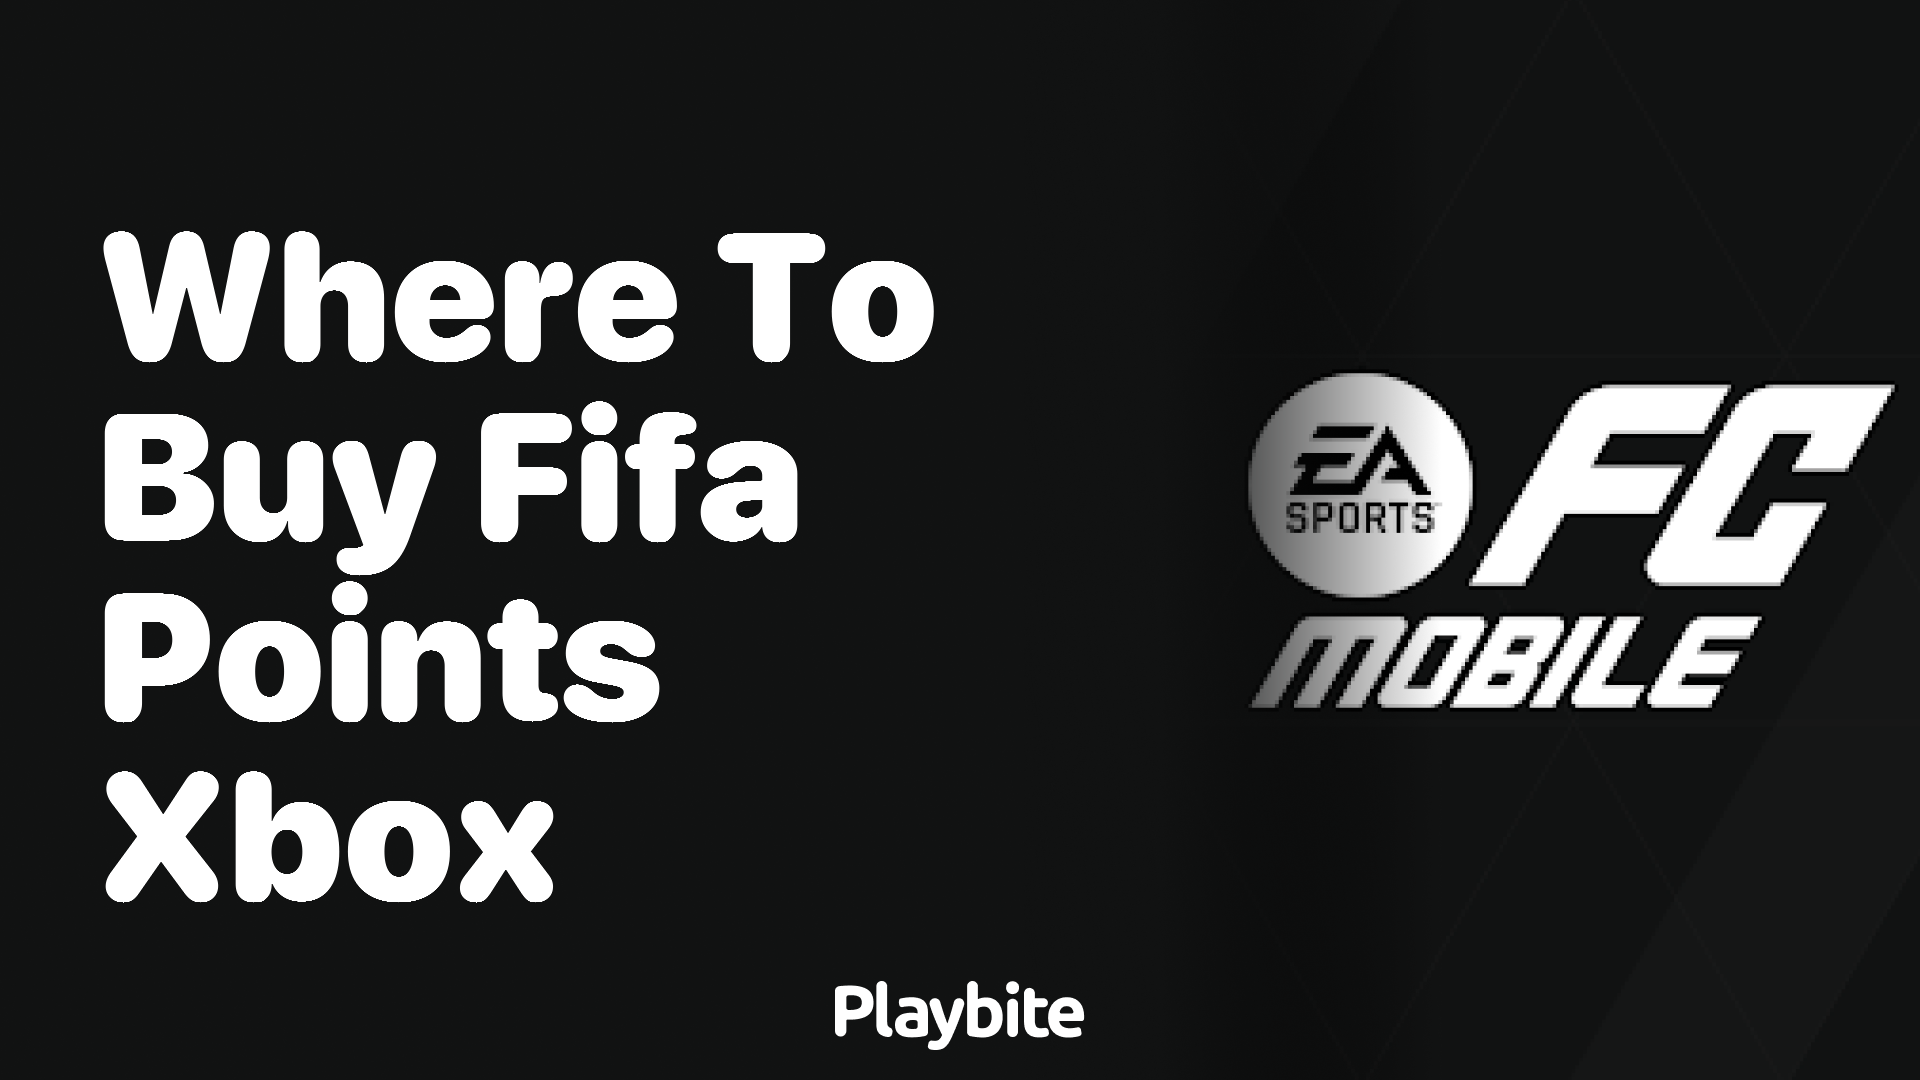 Where to Buy FIFA Points for Xbox: A Quick Guide